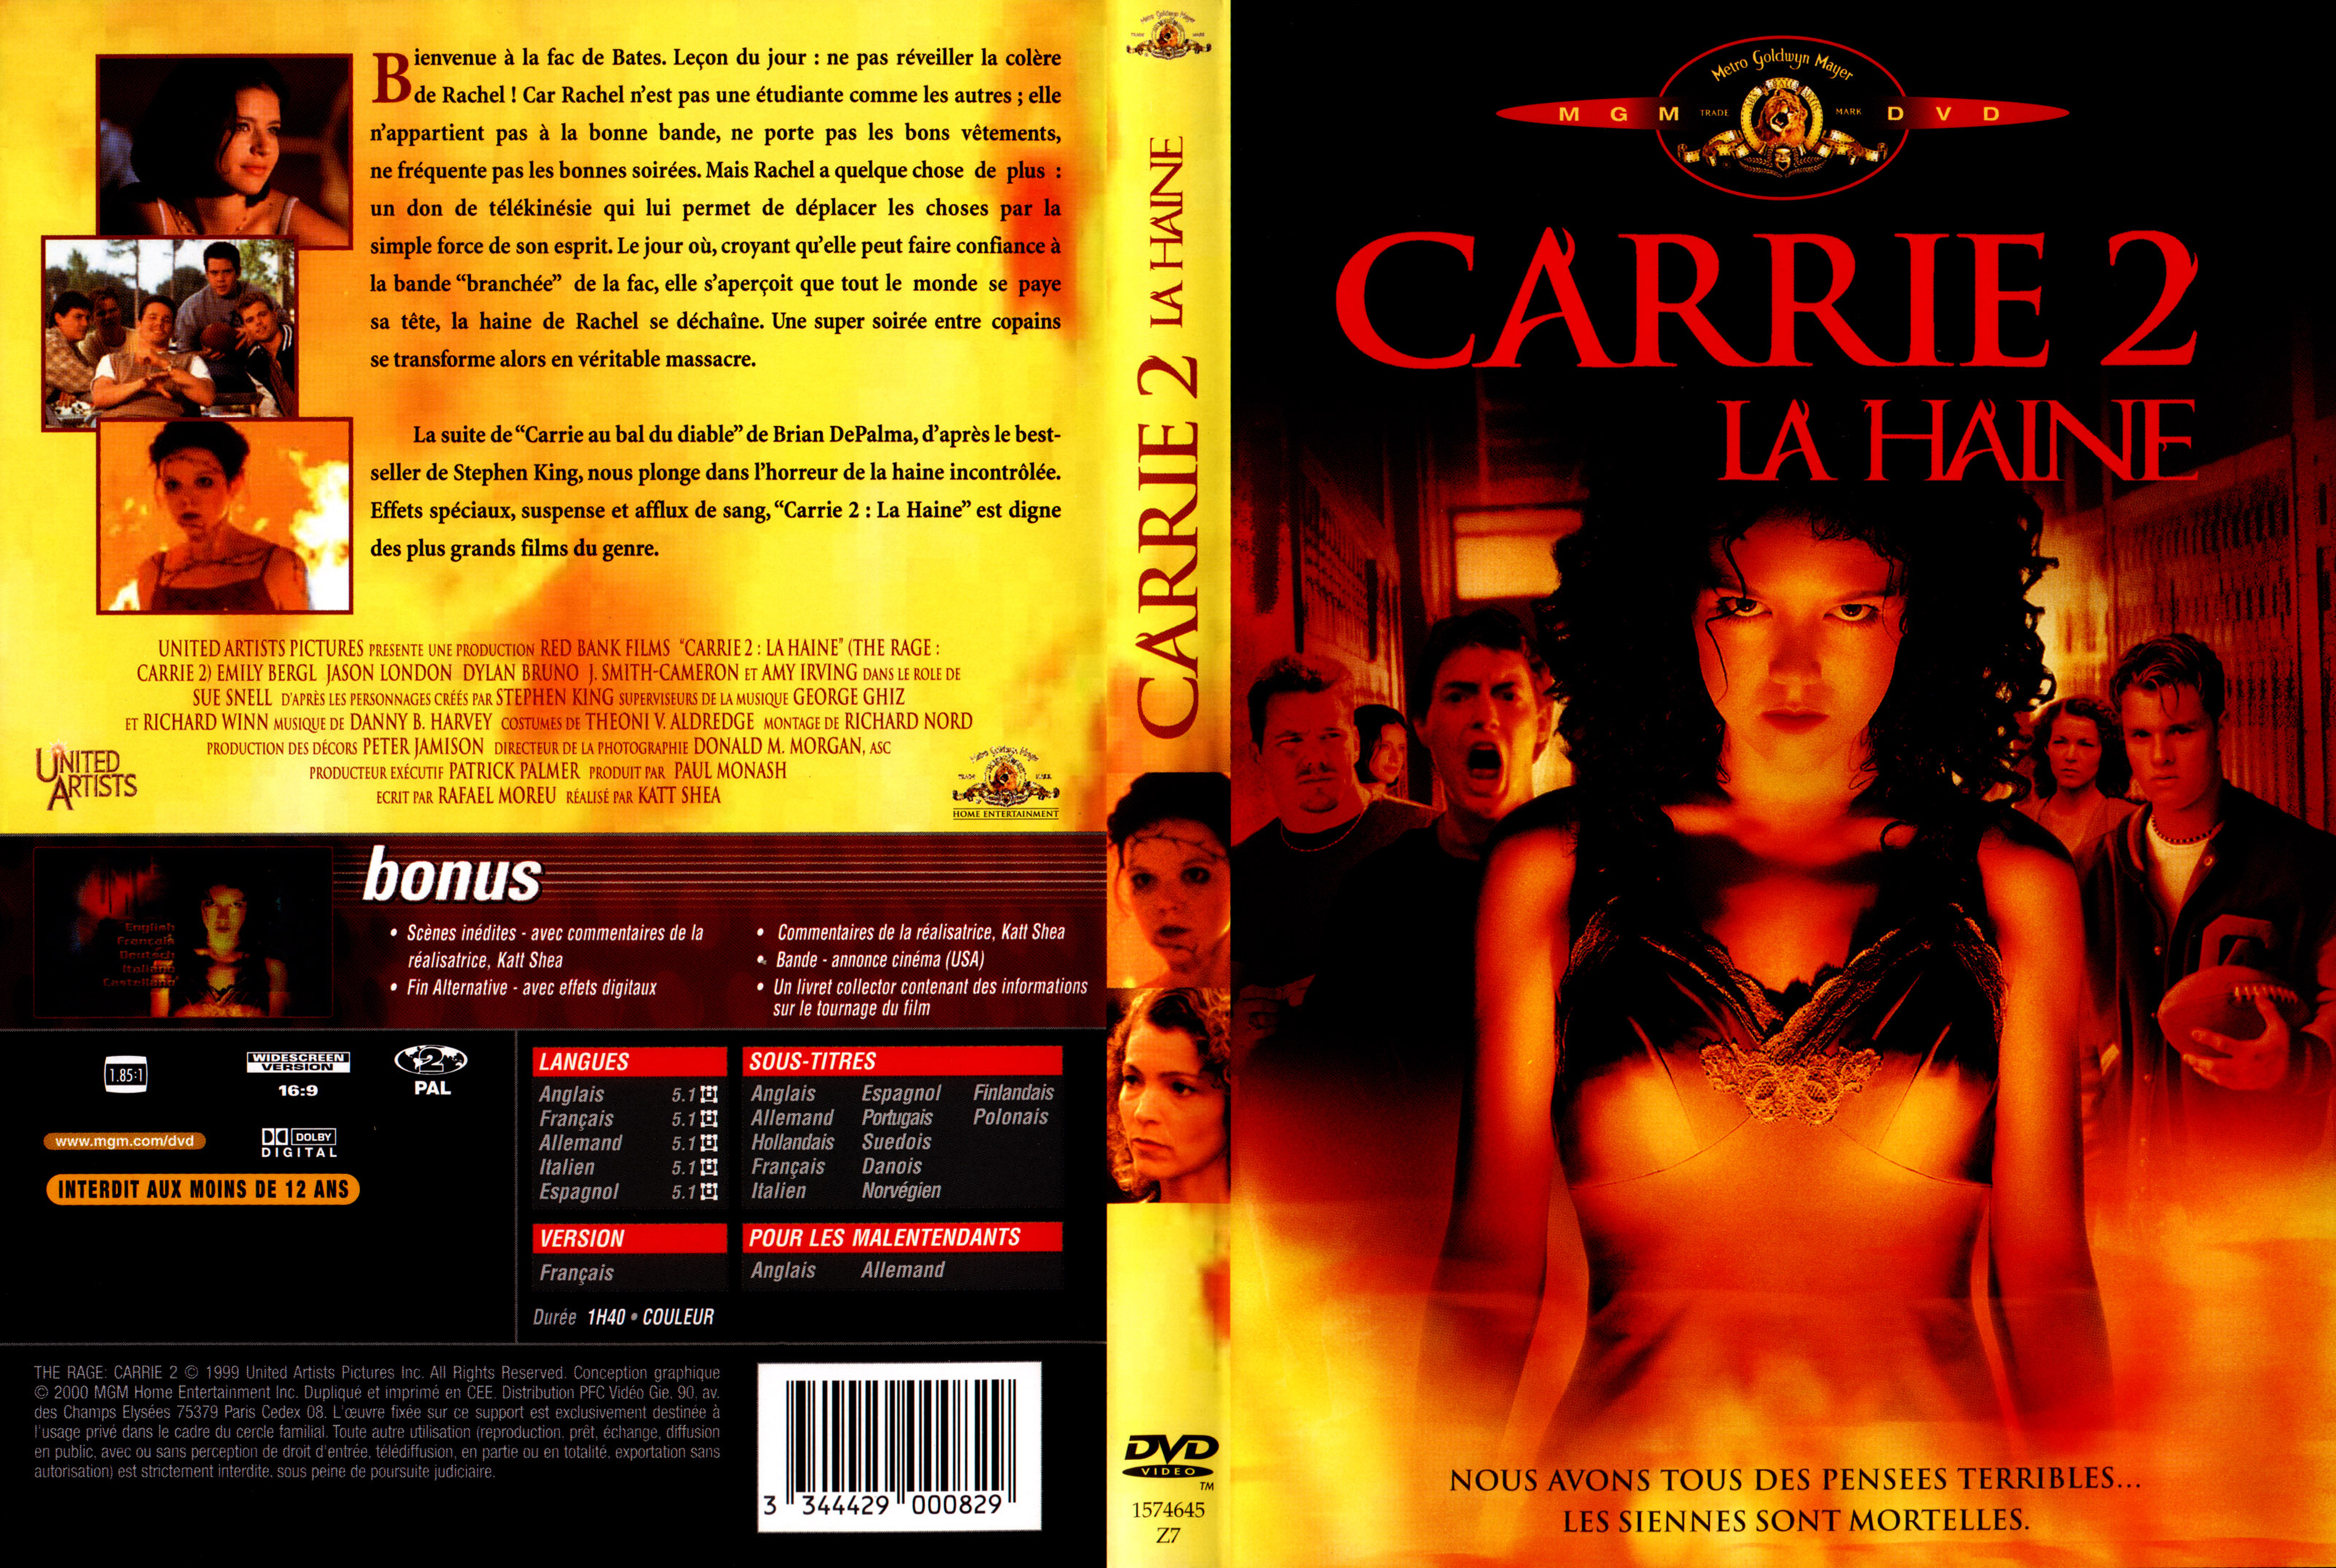 Jaquette DVD Carrie 2 v2